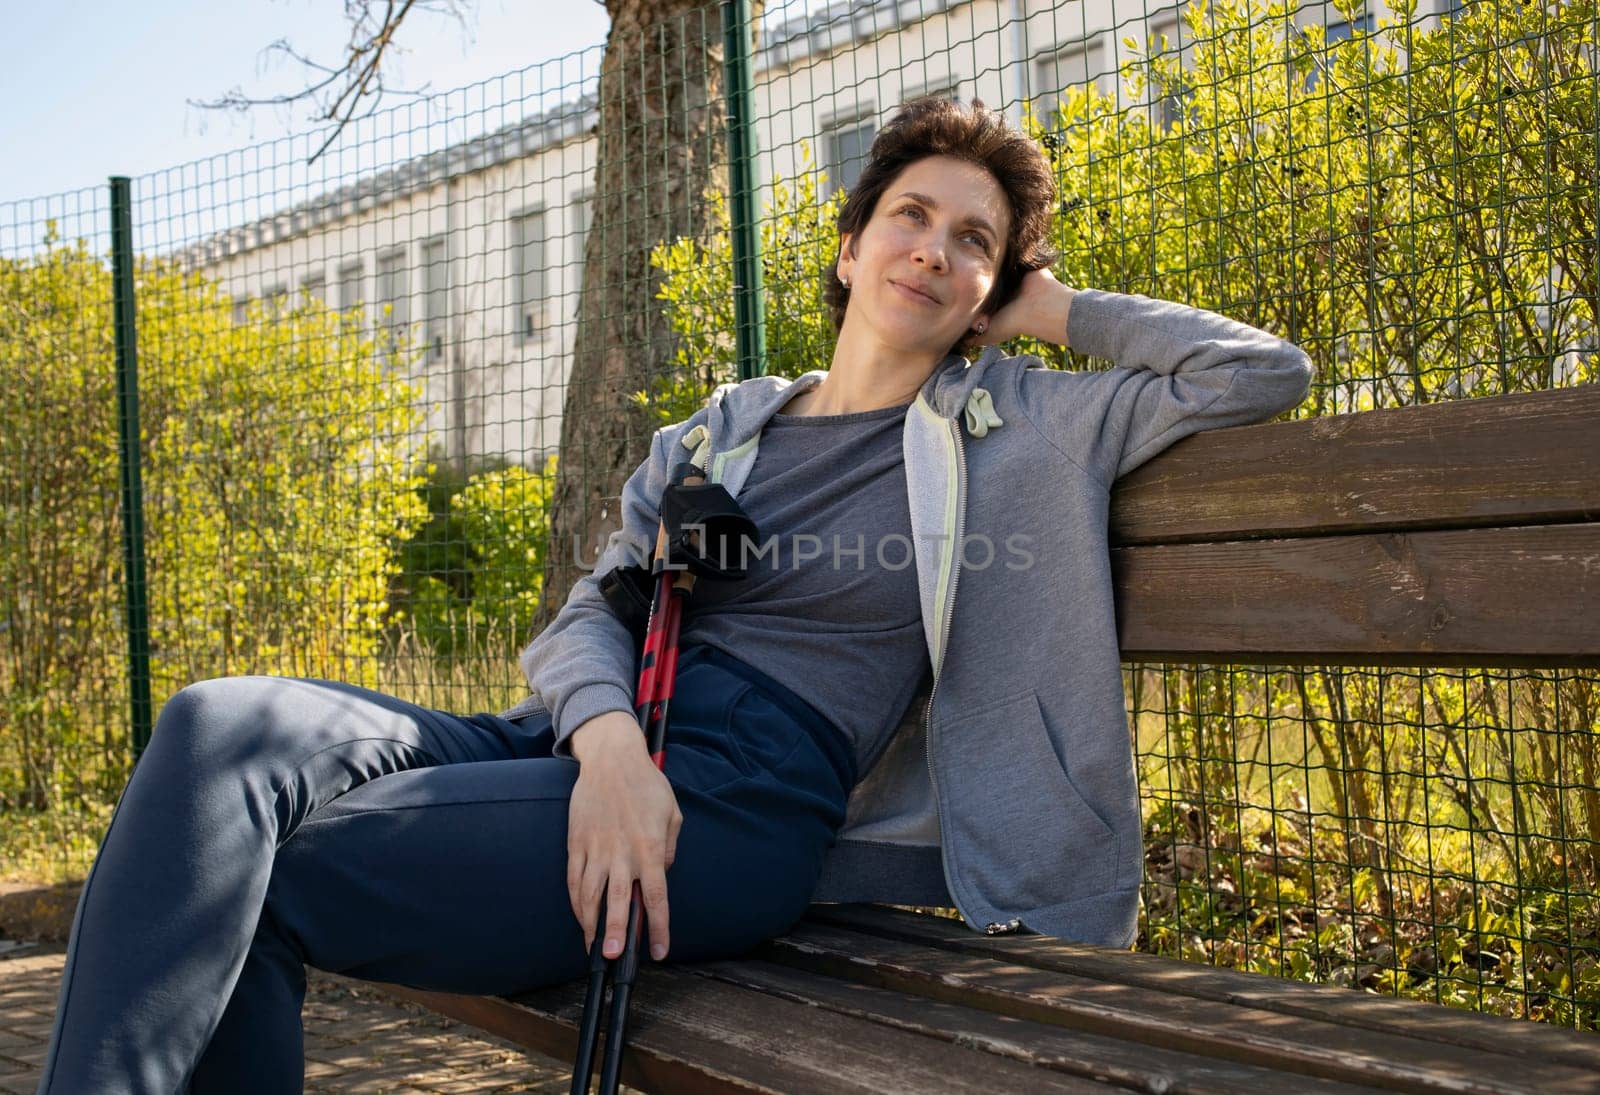 Happy Resting, Relaxing Woman Sits on Bench Holding Poles After Nordic Walking. Beautiful Happy Caucasian Woman Enjoys Sunny Day. Physical Activity With Walking Poles. Outdoor Recreation. Horizontal by netatsi